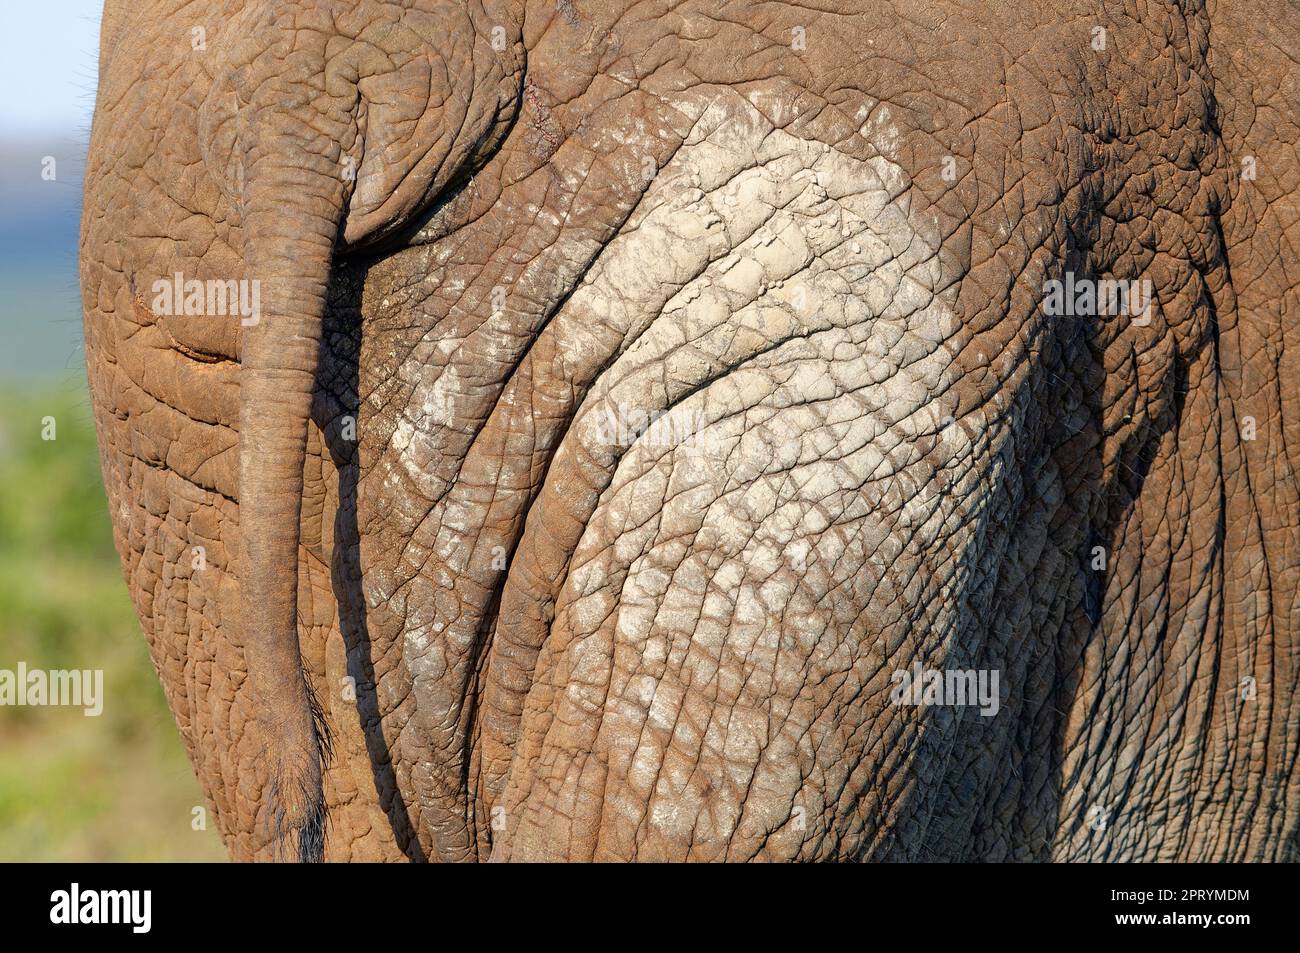 African bush elephant (Loxodonta africana), adult animal, rear and tail close-up, skin detail, Addo Elephant National Park, Eastern Cape, South Africa Stock Photo